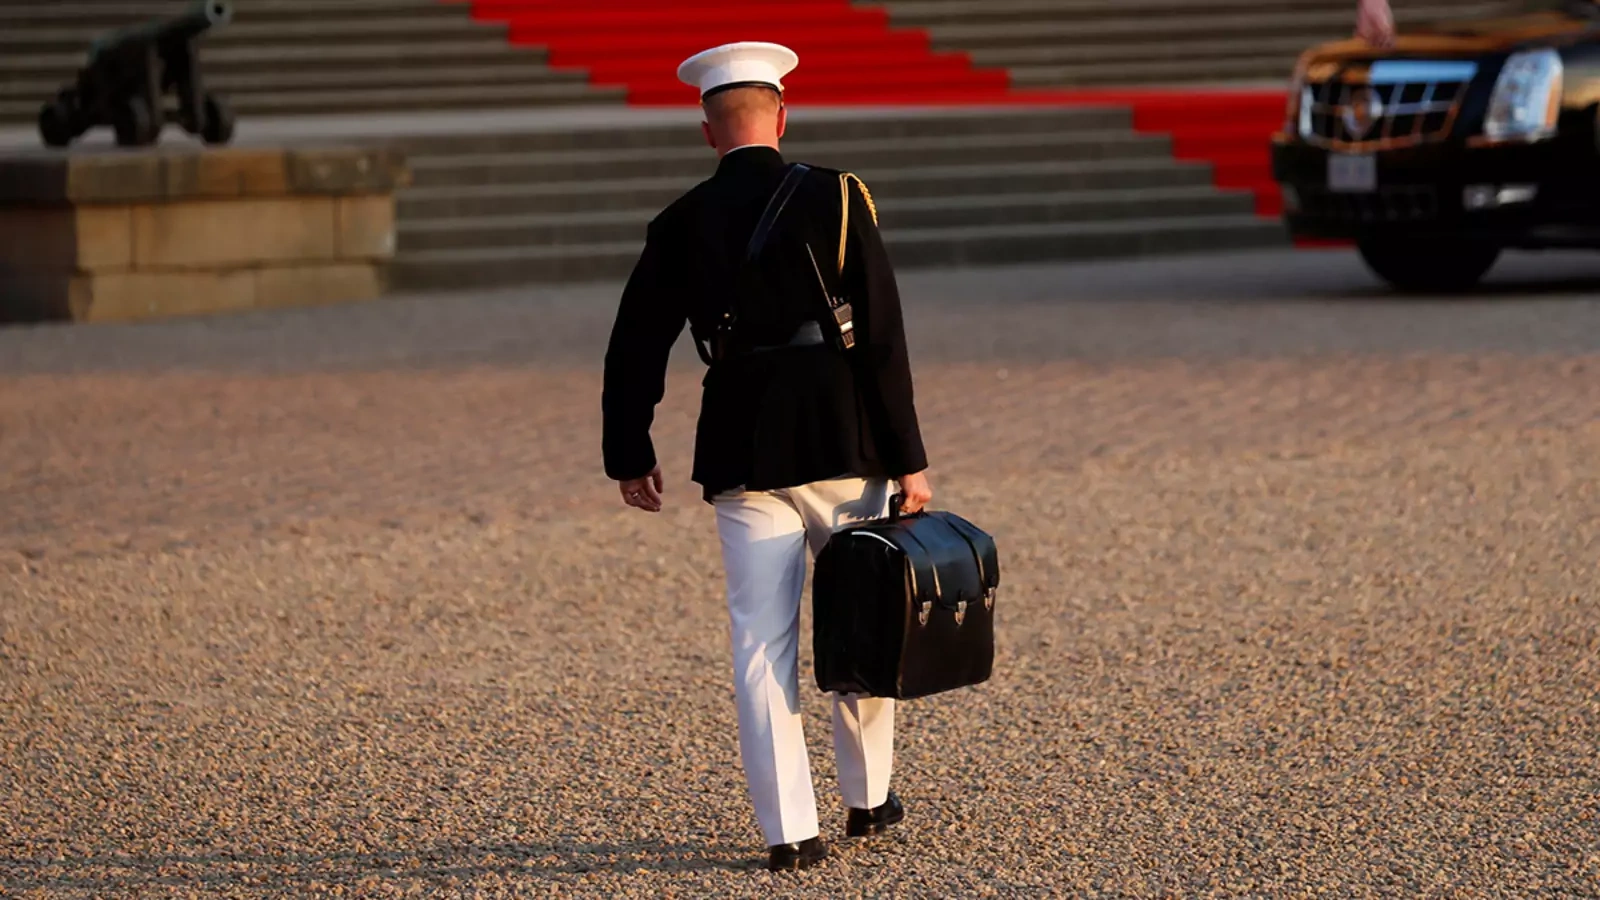 A military aide carries the "football" containing launch codes for U.S. nuclear weapons.